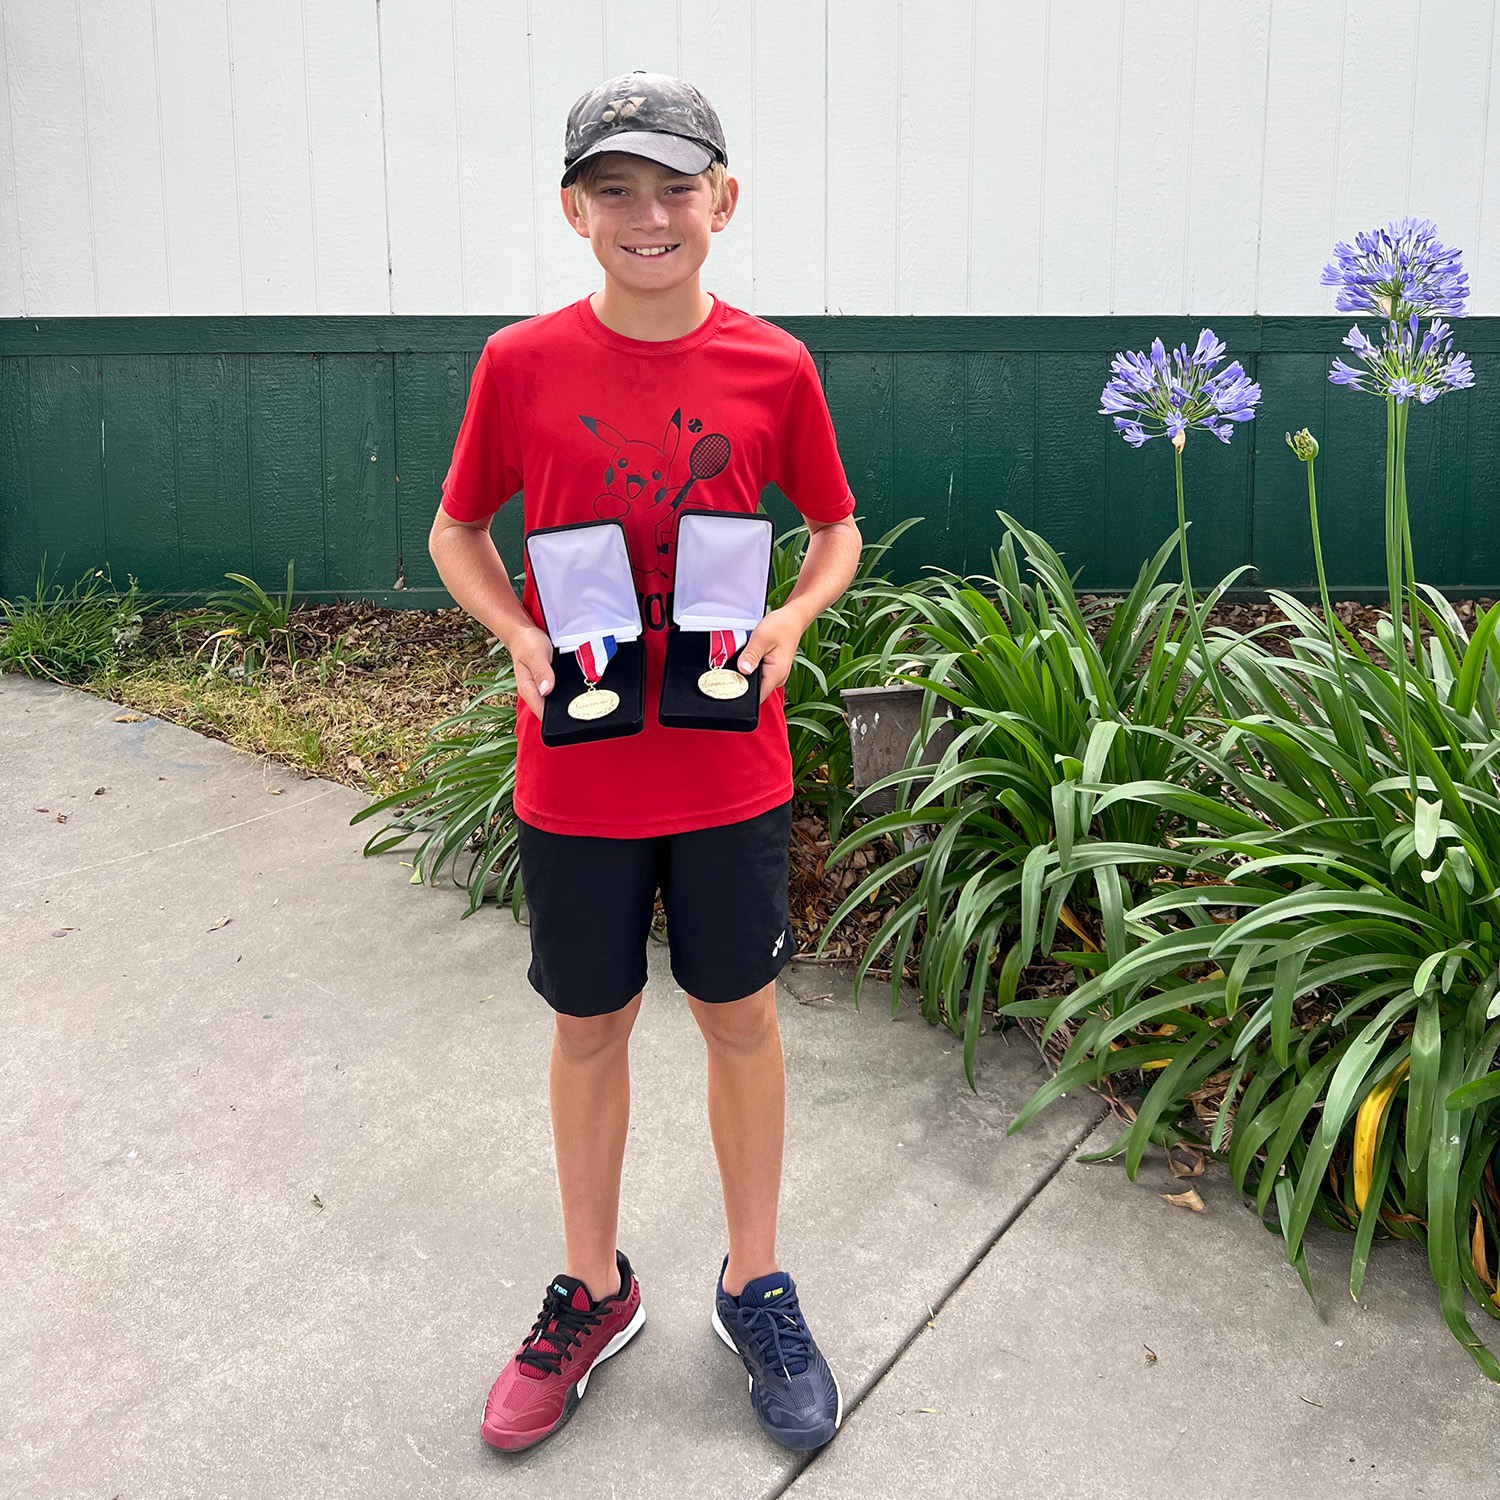 James Borchard wins Boys' 12s Singles and Doubles at L2 in Long Beach, CA.